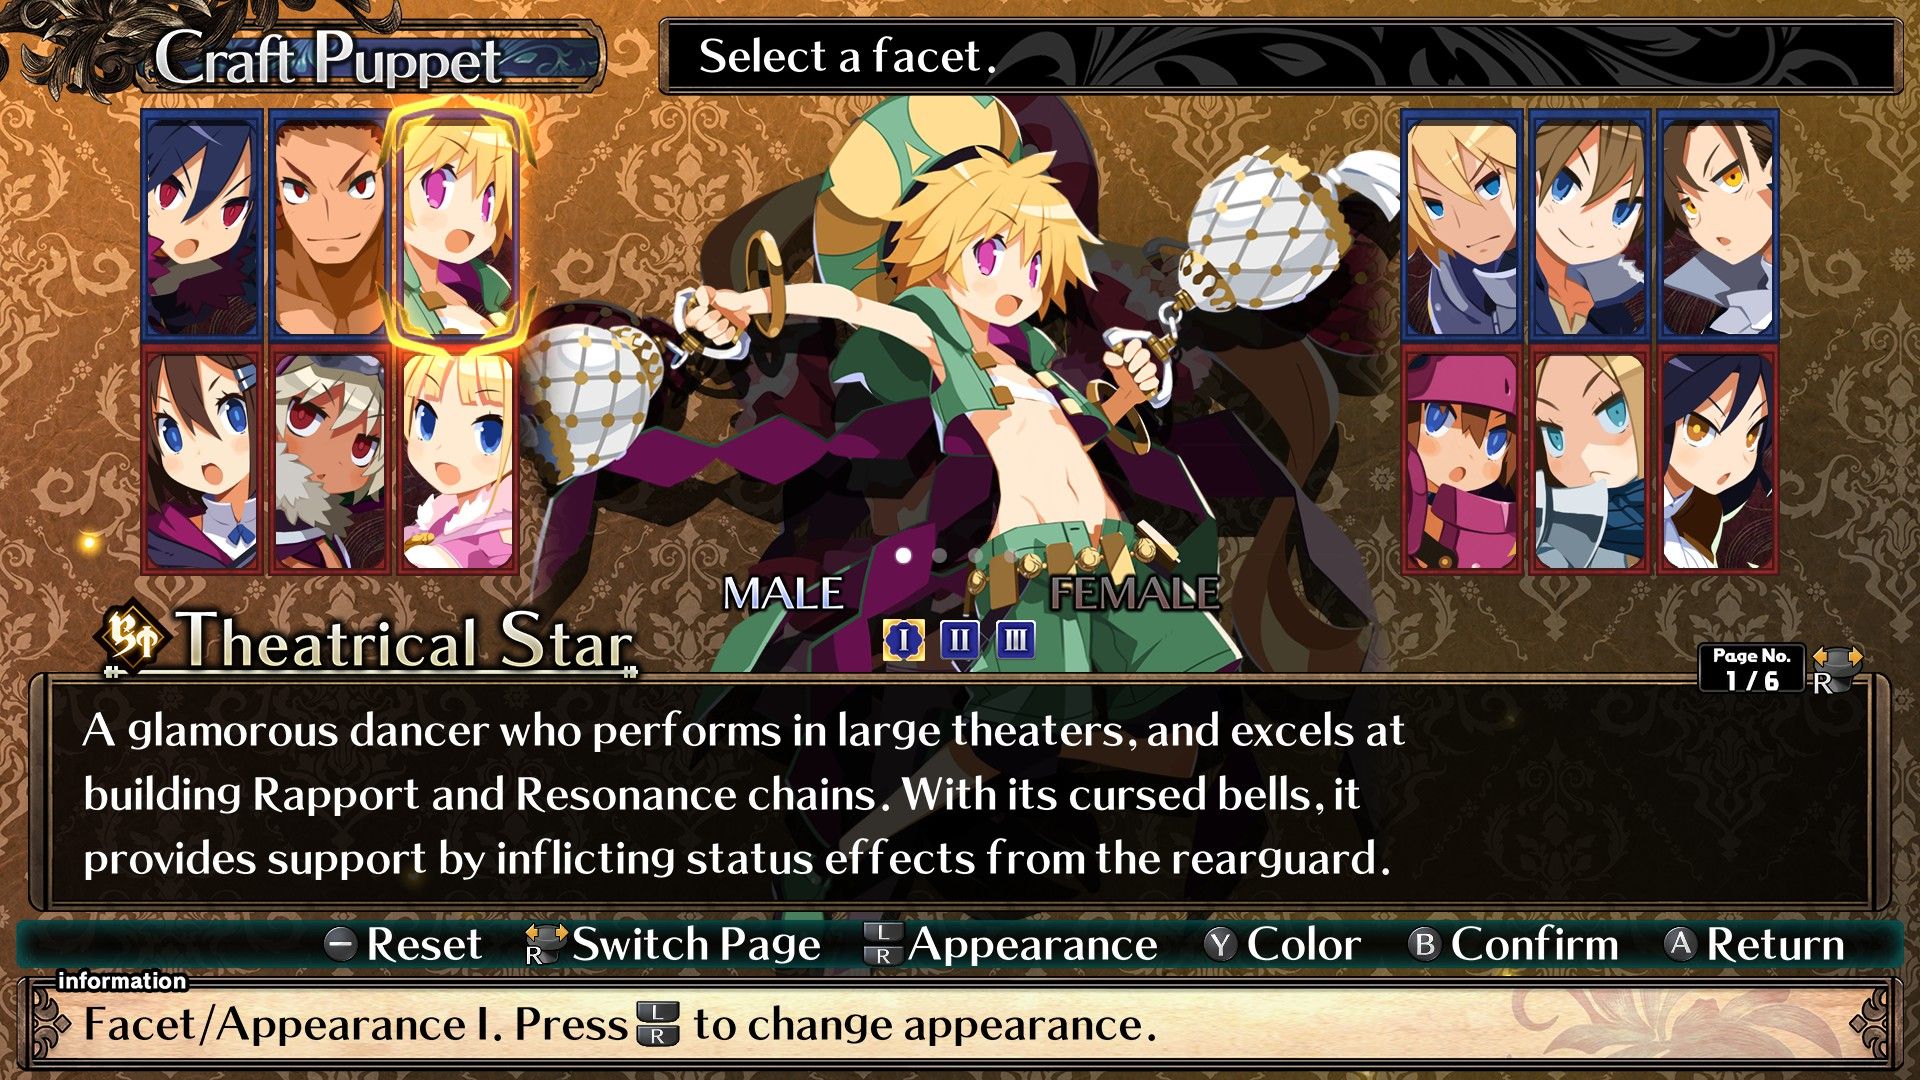 Labyrinth Of Galleria: The Moon Society Theatrical Star character creation screen showing the male character and class description.